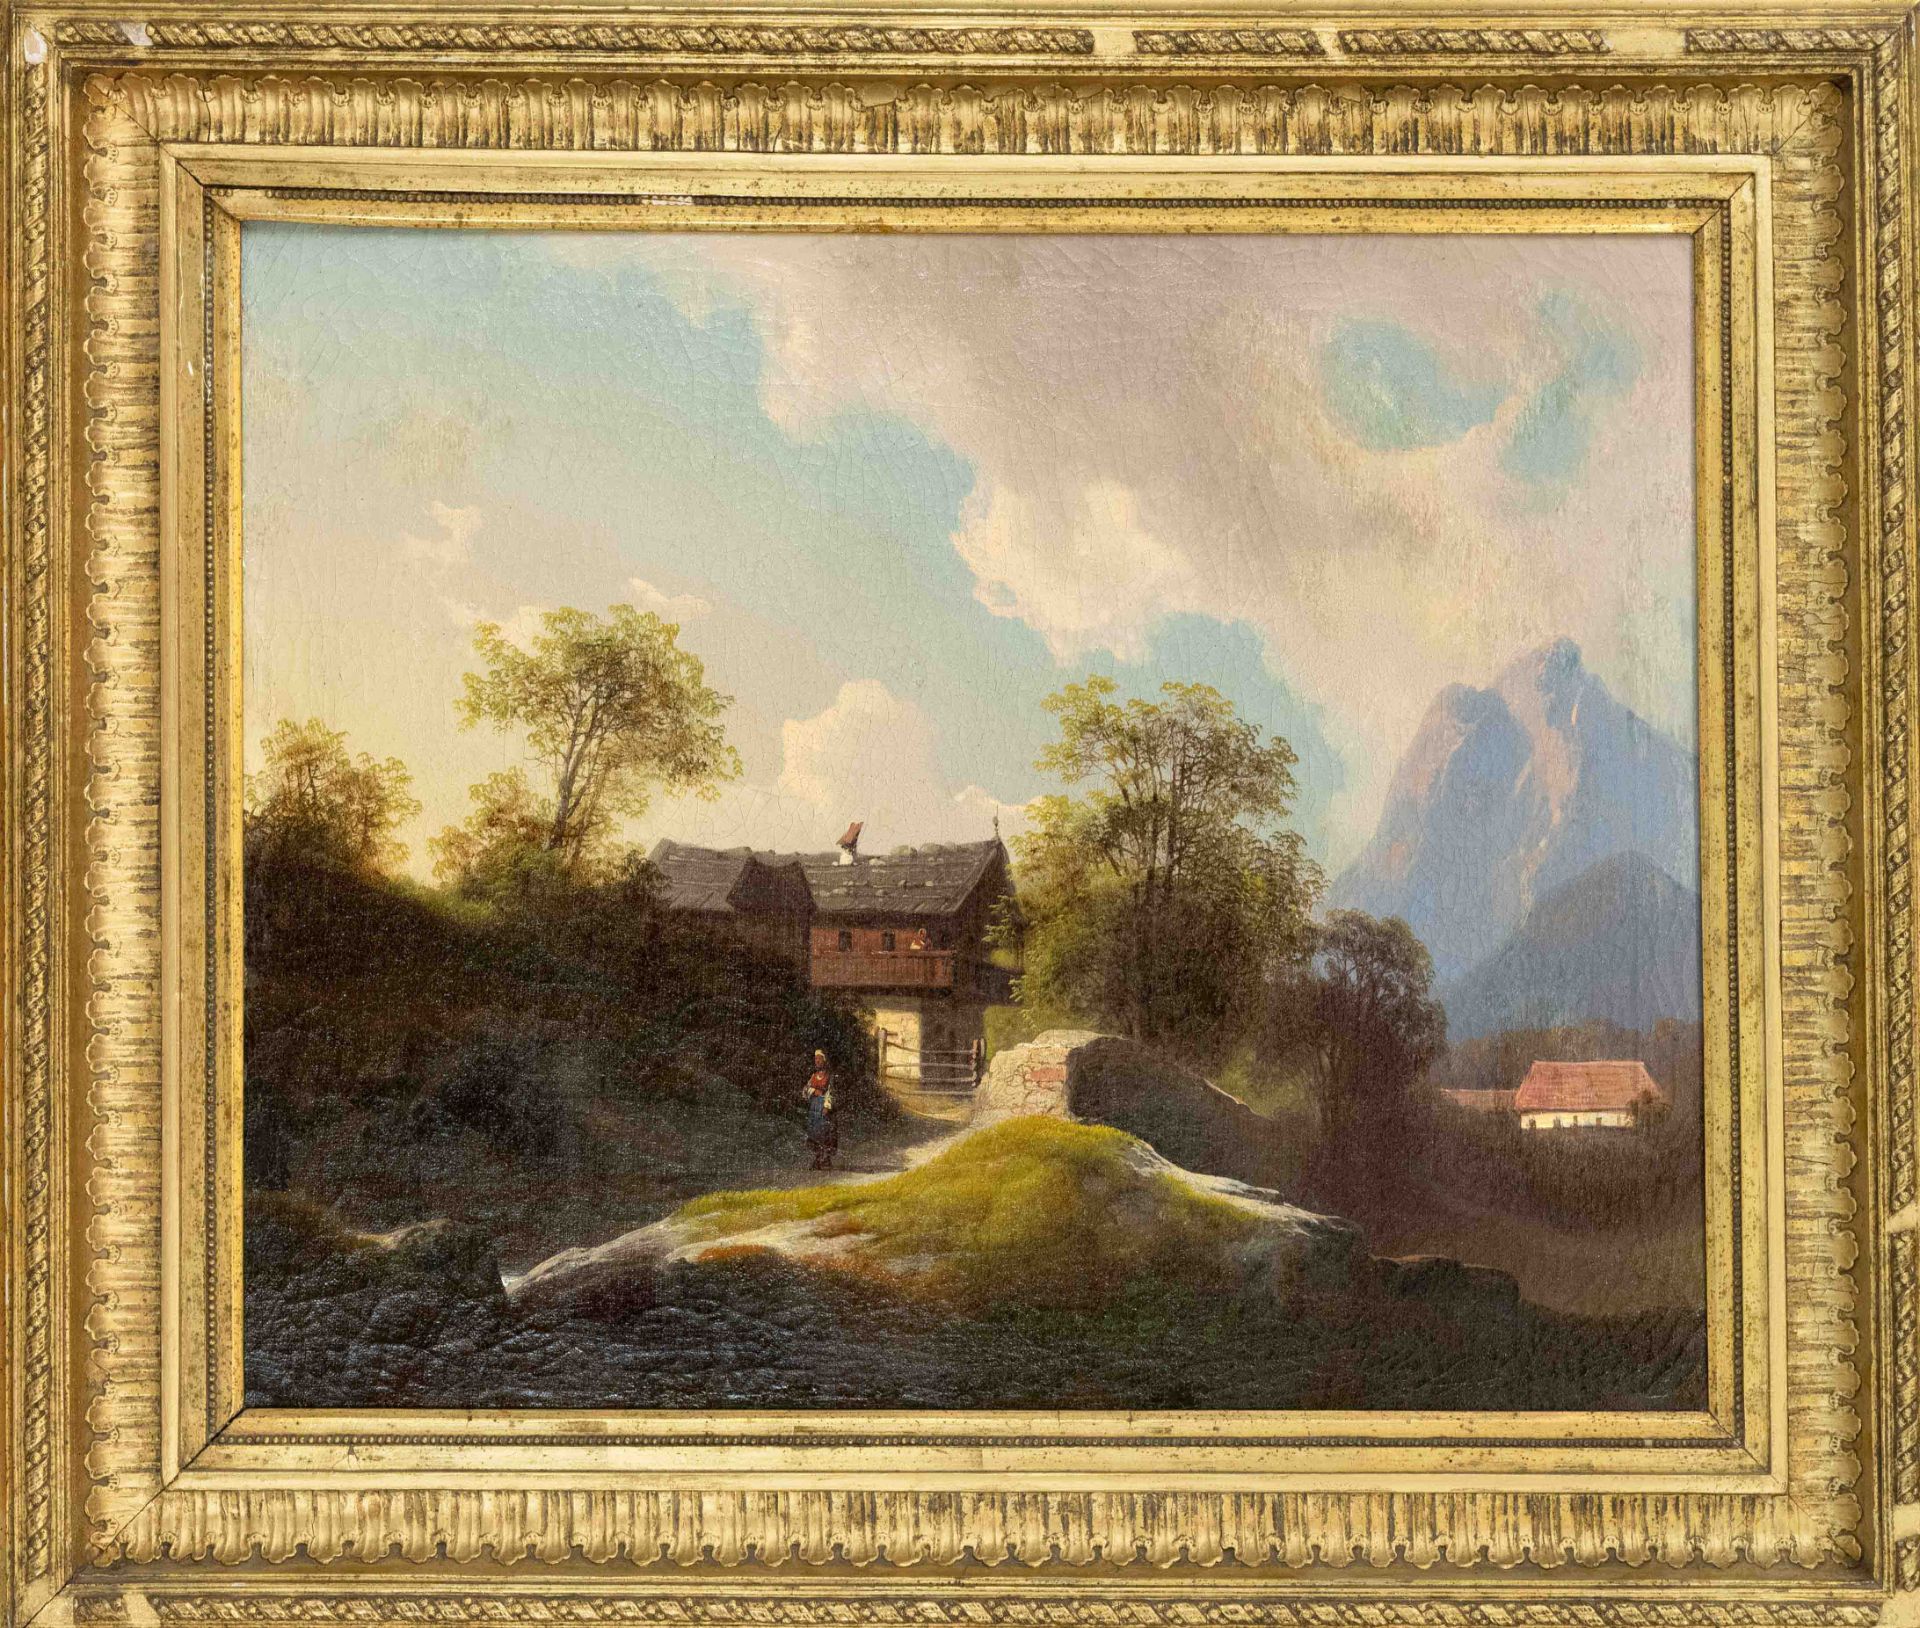 South German landscape painter of the 19th century, Tyrolean alpine idyll, oil on canvas,